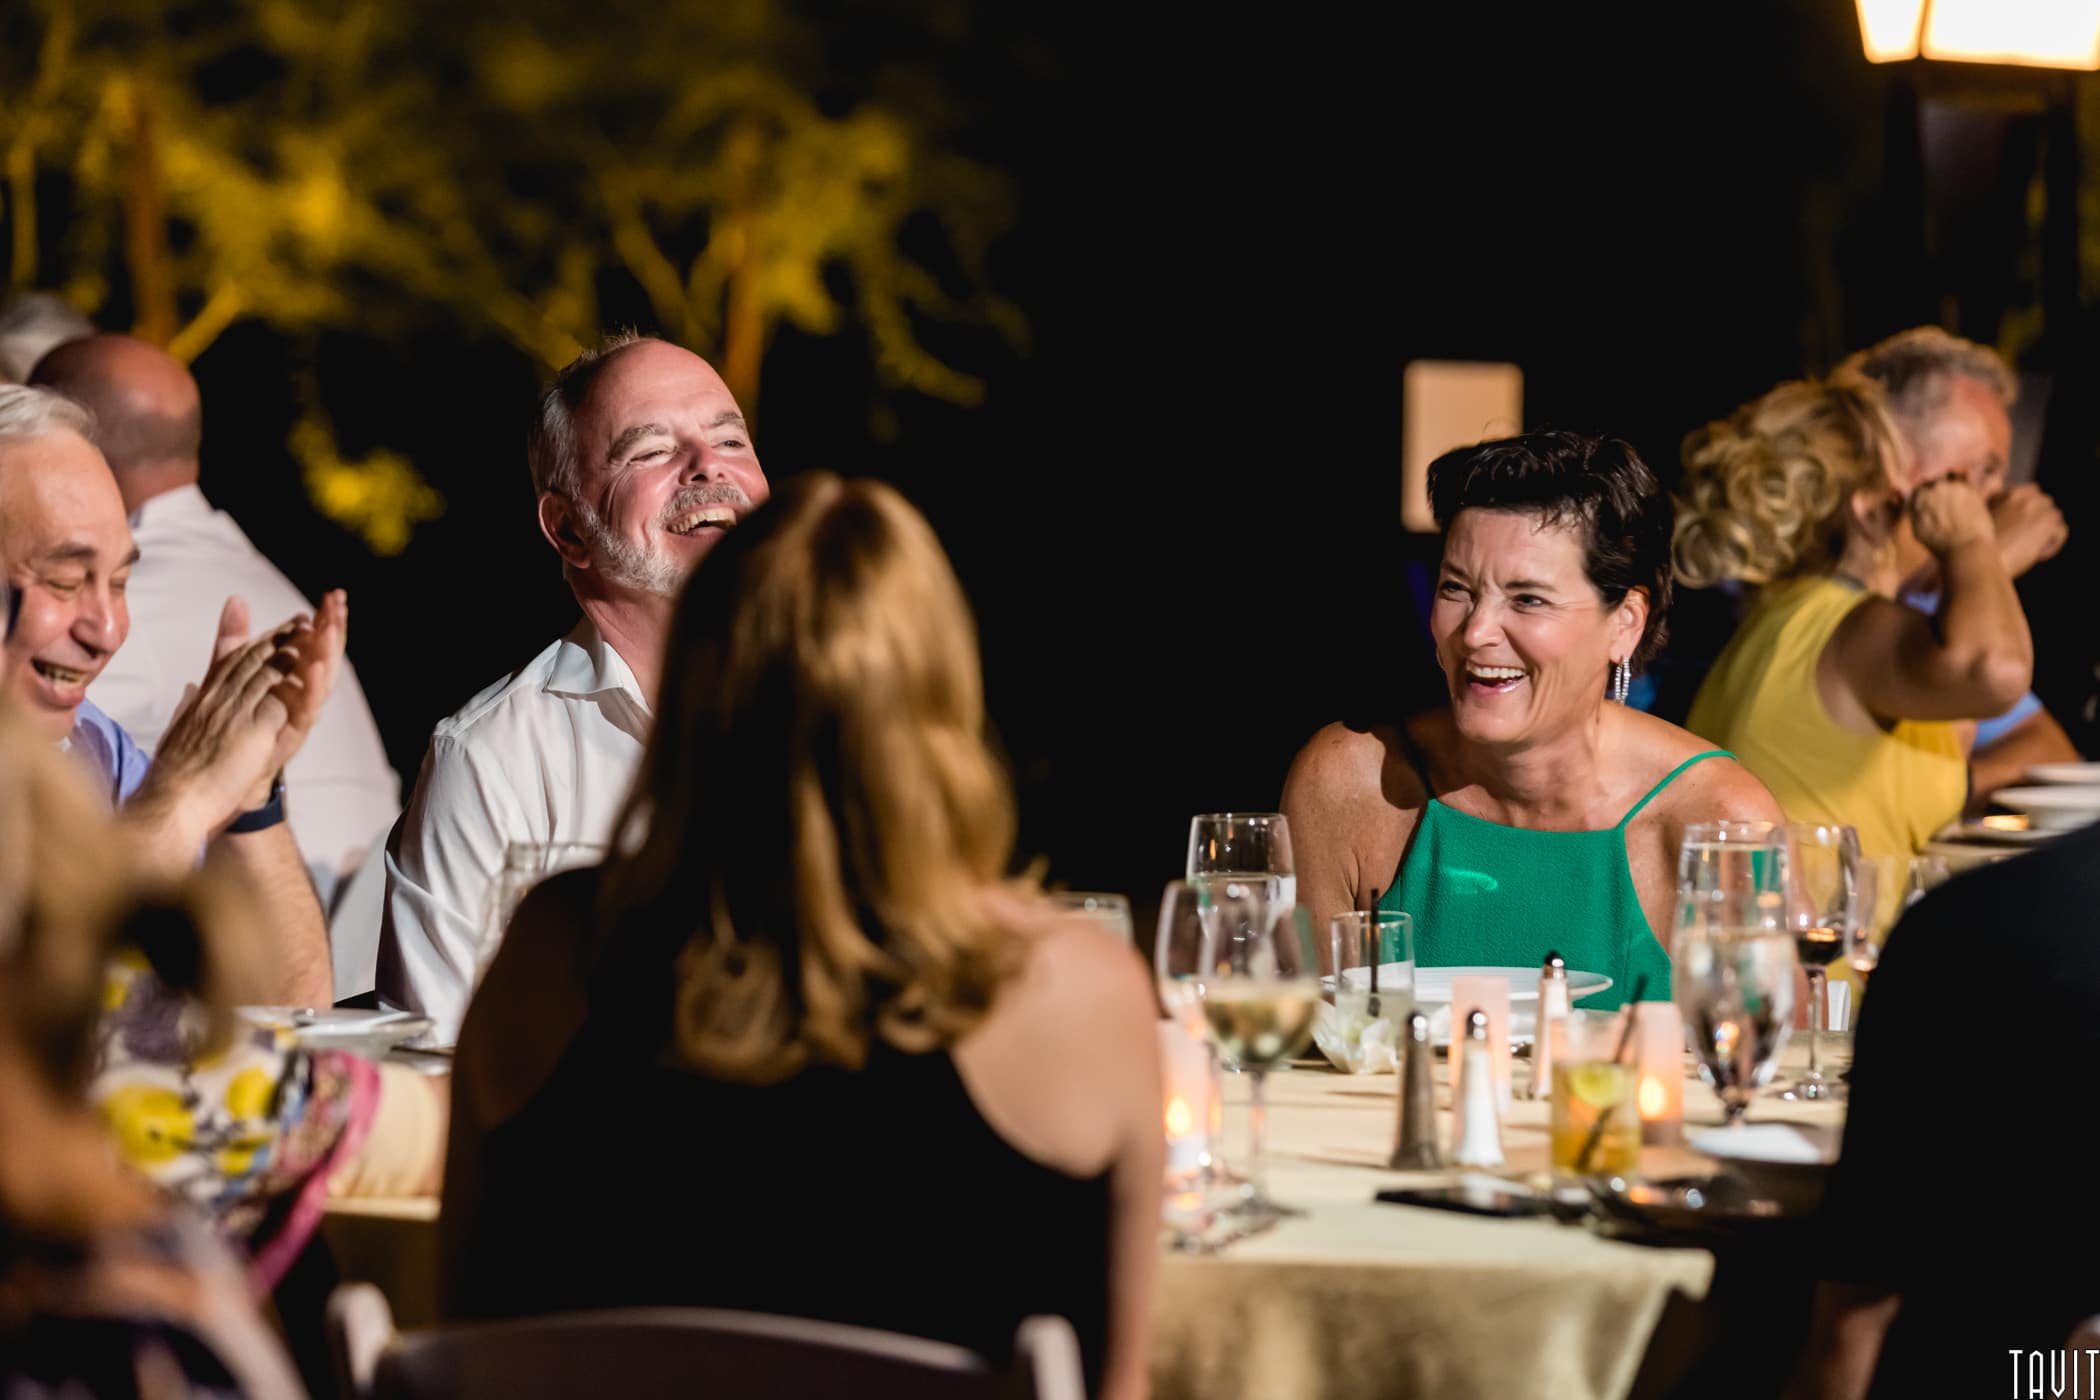 People laughing at table for outside event